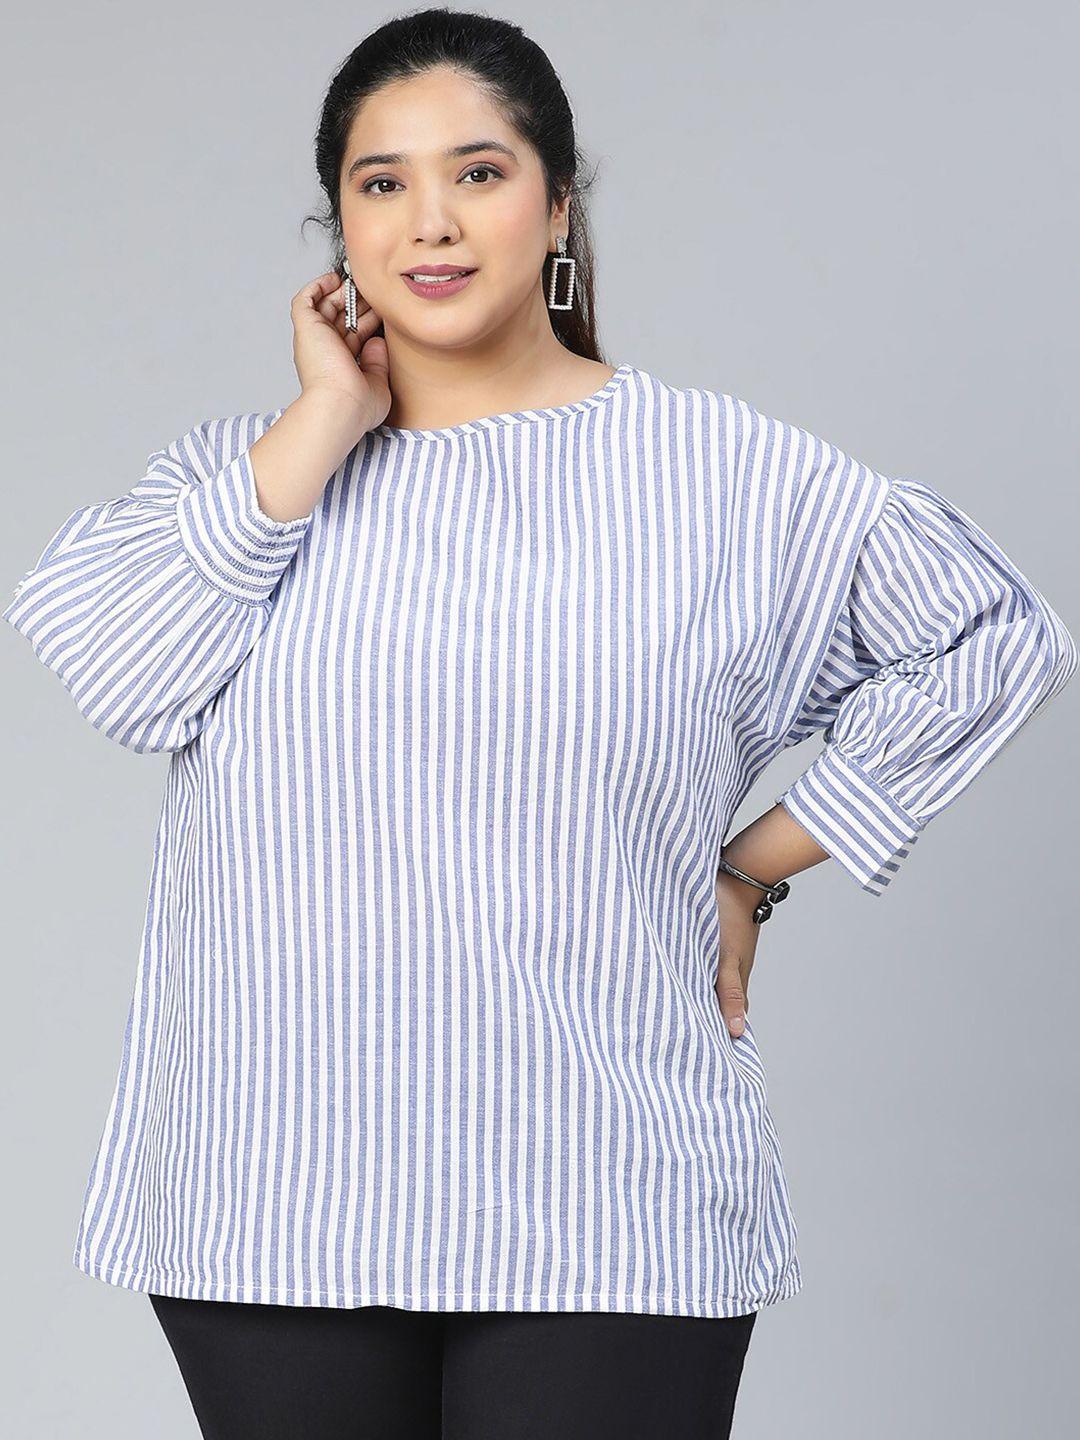 oxolloxo blue striped top